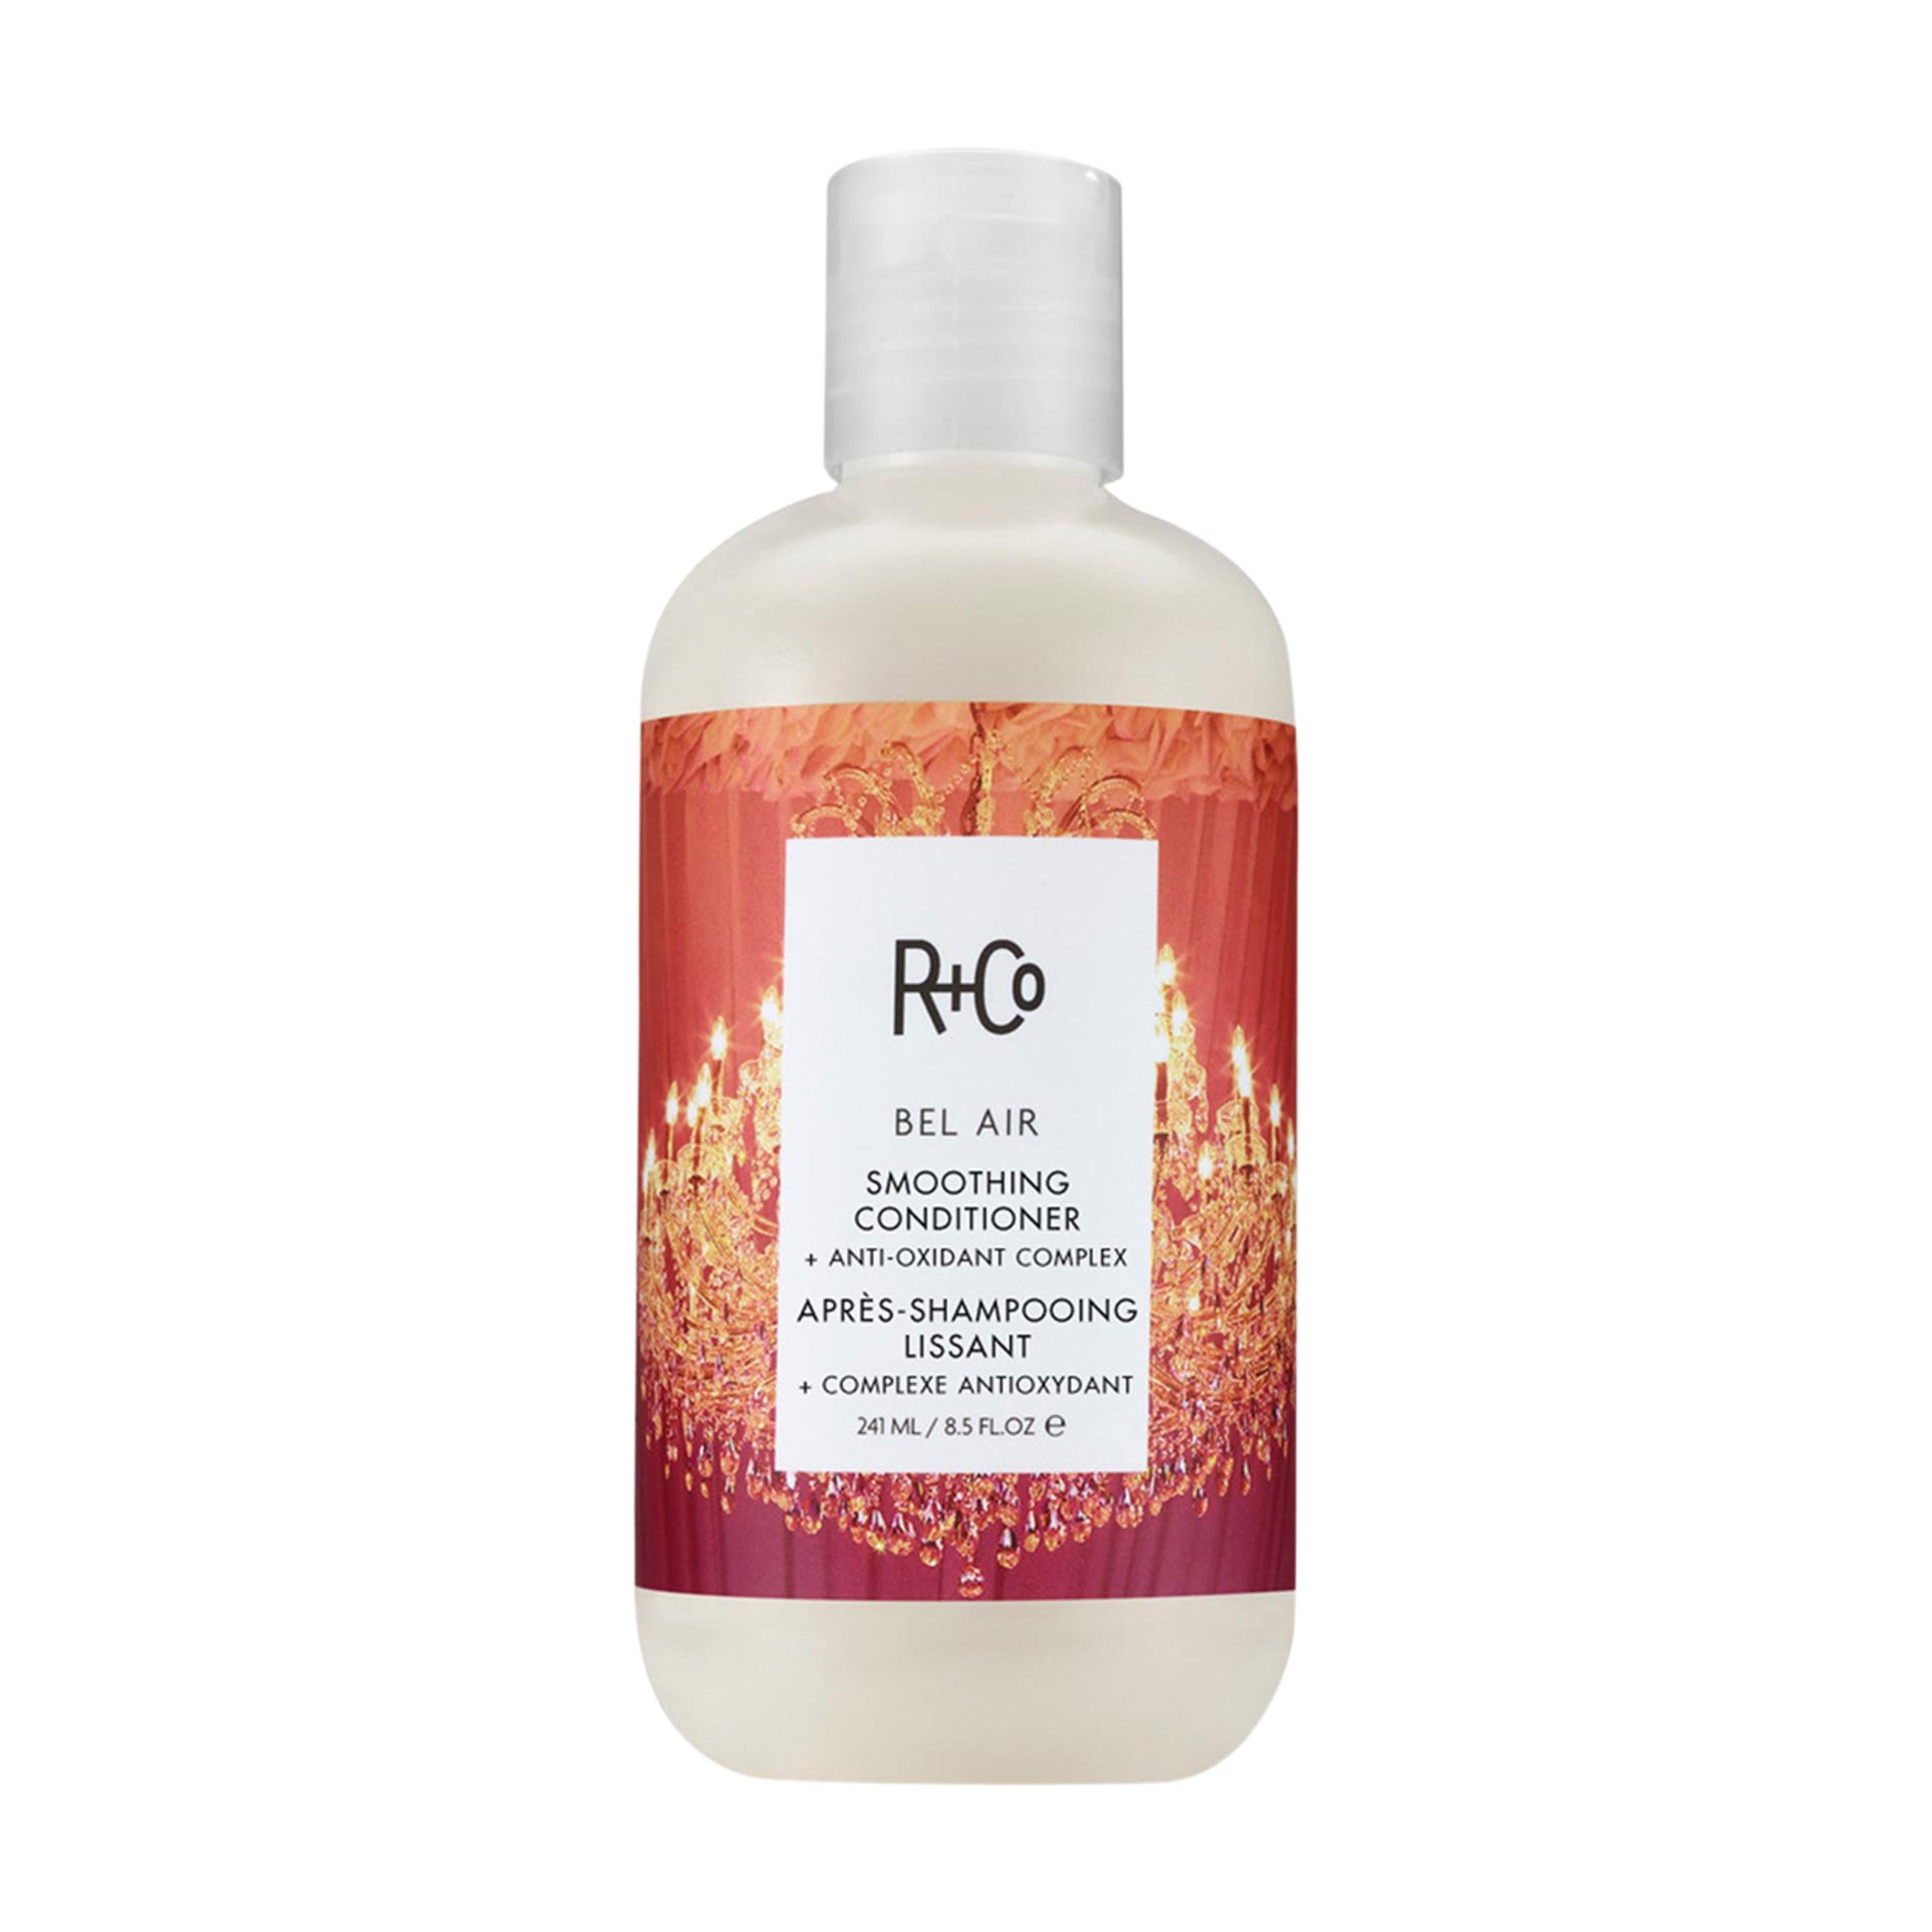 R+Co Bel Air Smoothing Conditioner and Anti-Oxidant Complex main image.